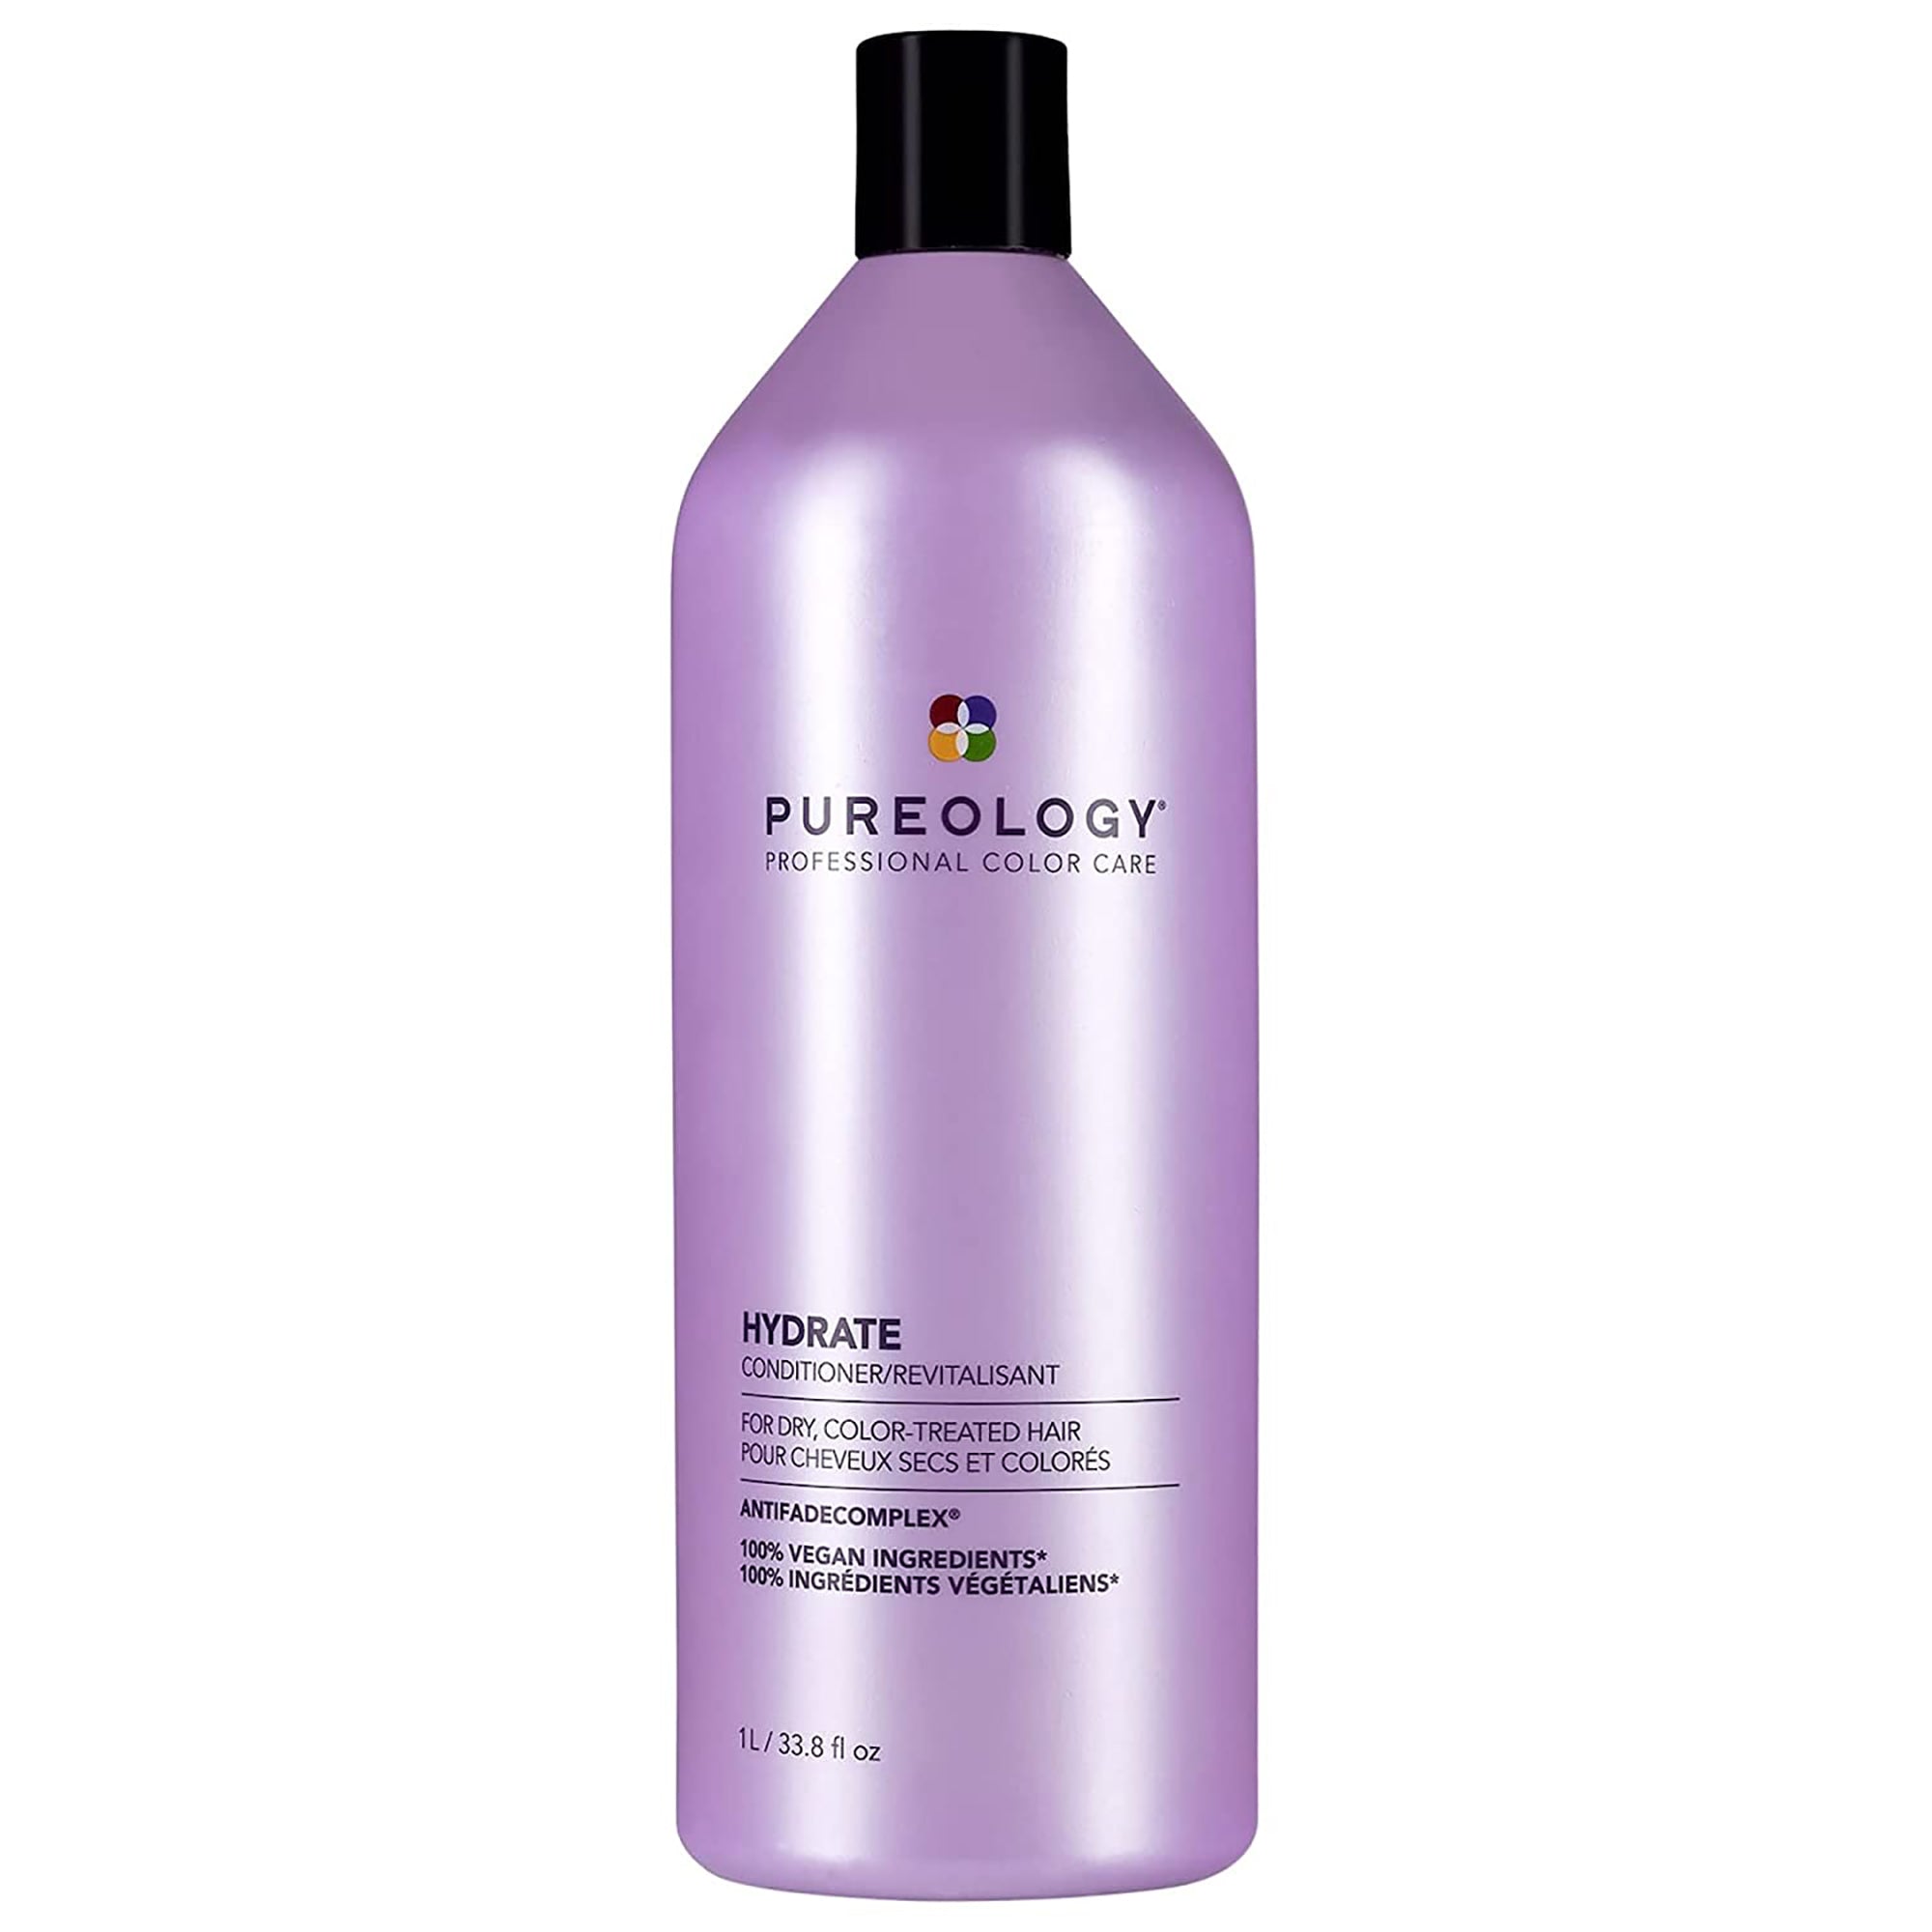 Pureology Hydrate Shampoo + Condition 33oz Duo ($170 Value)